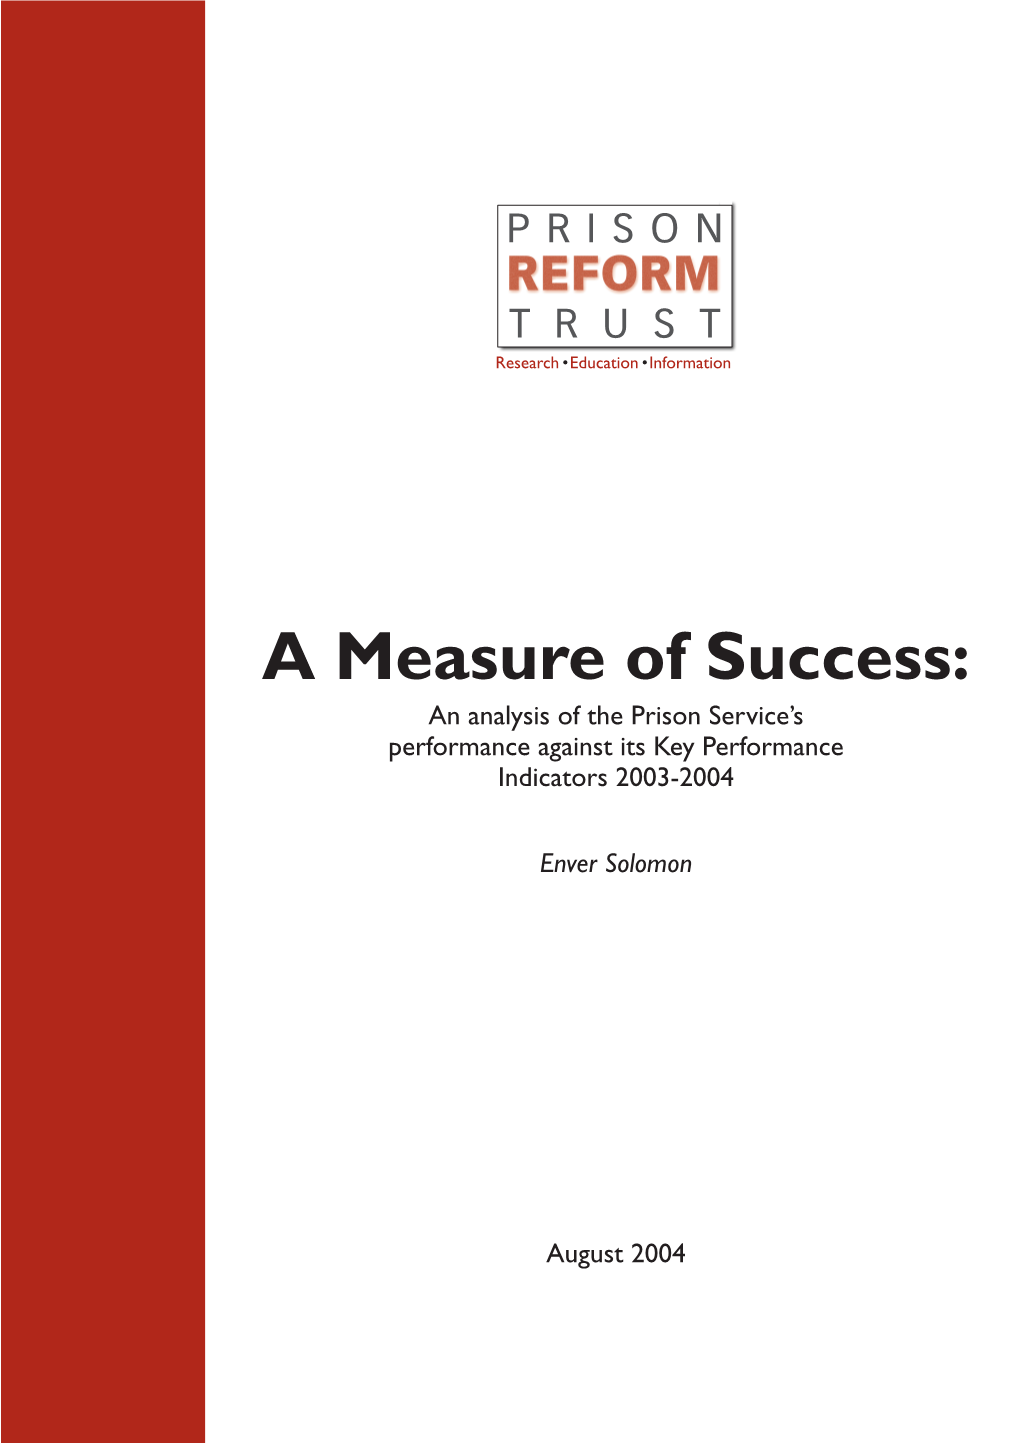 A Measure of Success: an Analysis of the Prison Service's Performance Against Its Key Performance Indicators